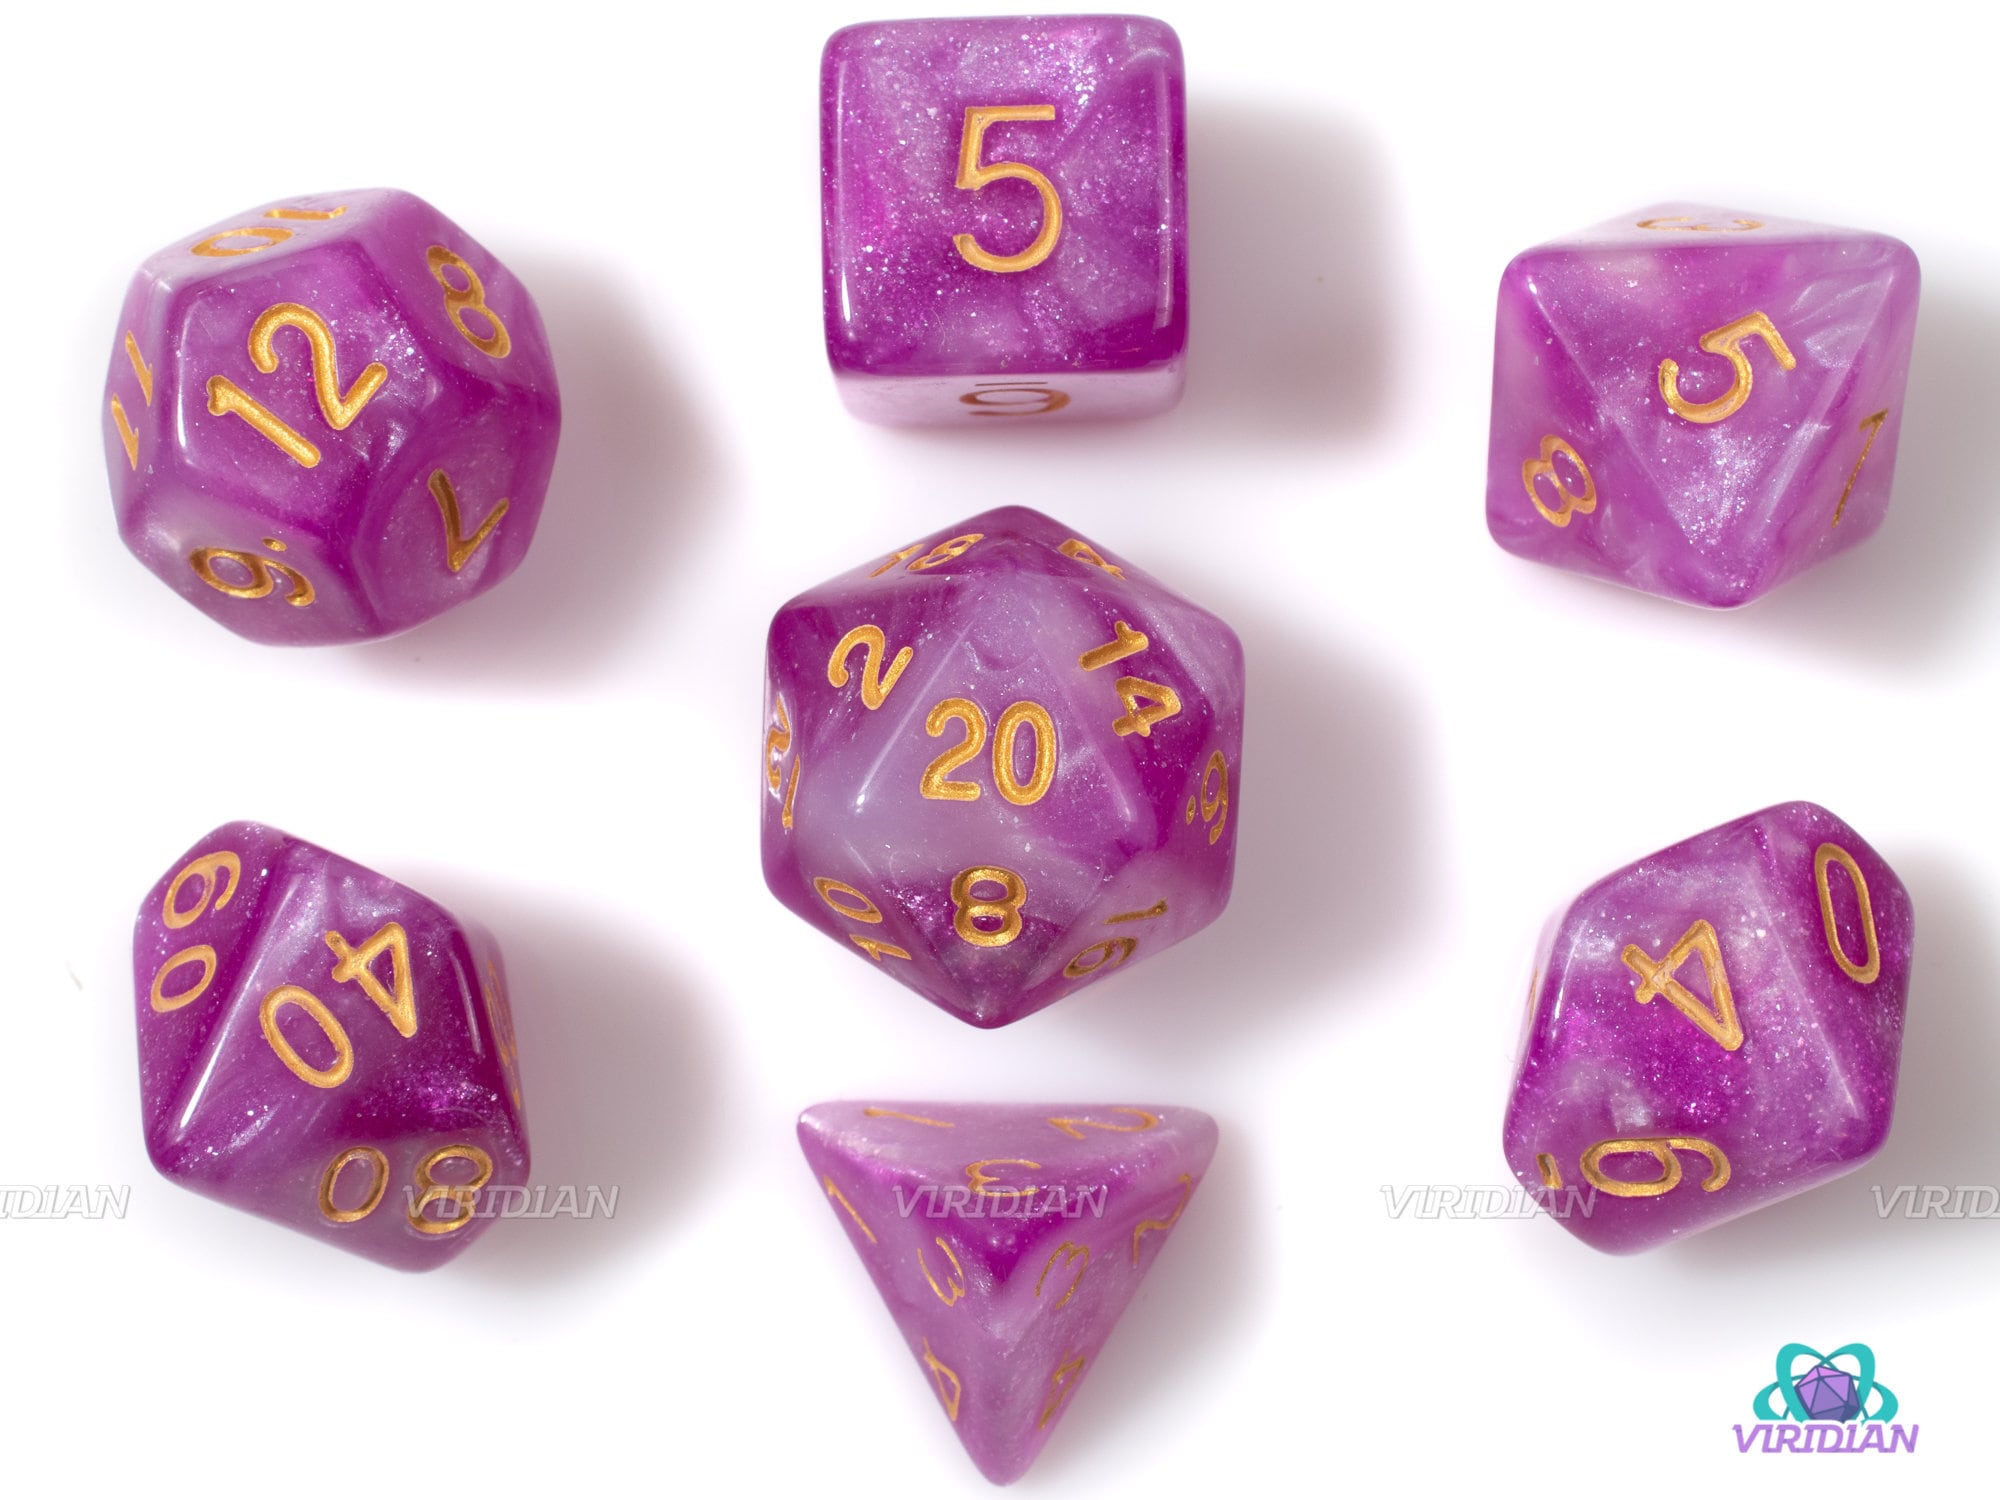 Bardic Love | Pink, Whie Swirled, Glittery Acrylic Dice Set (7) | TTRPG Dnd Polyhedral Set